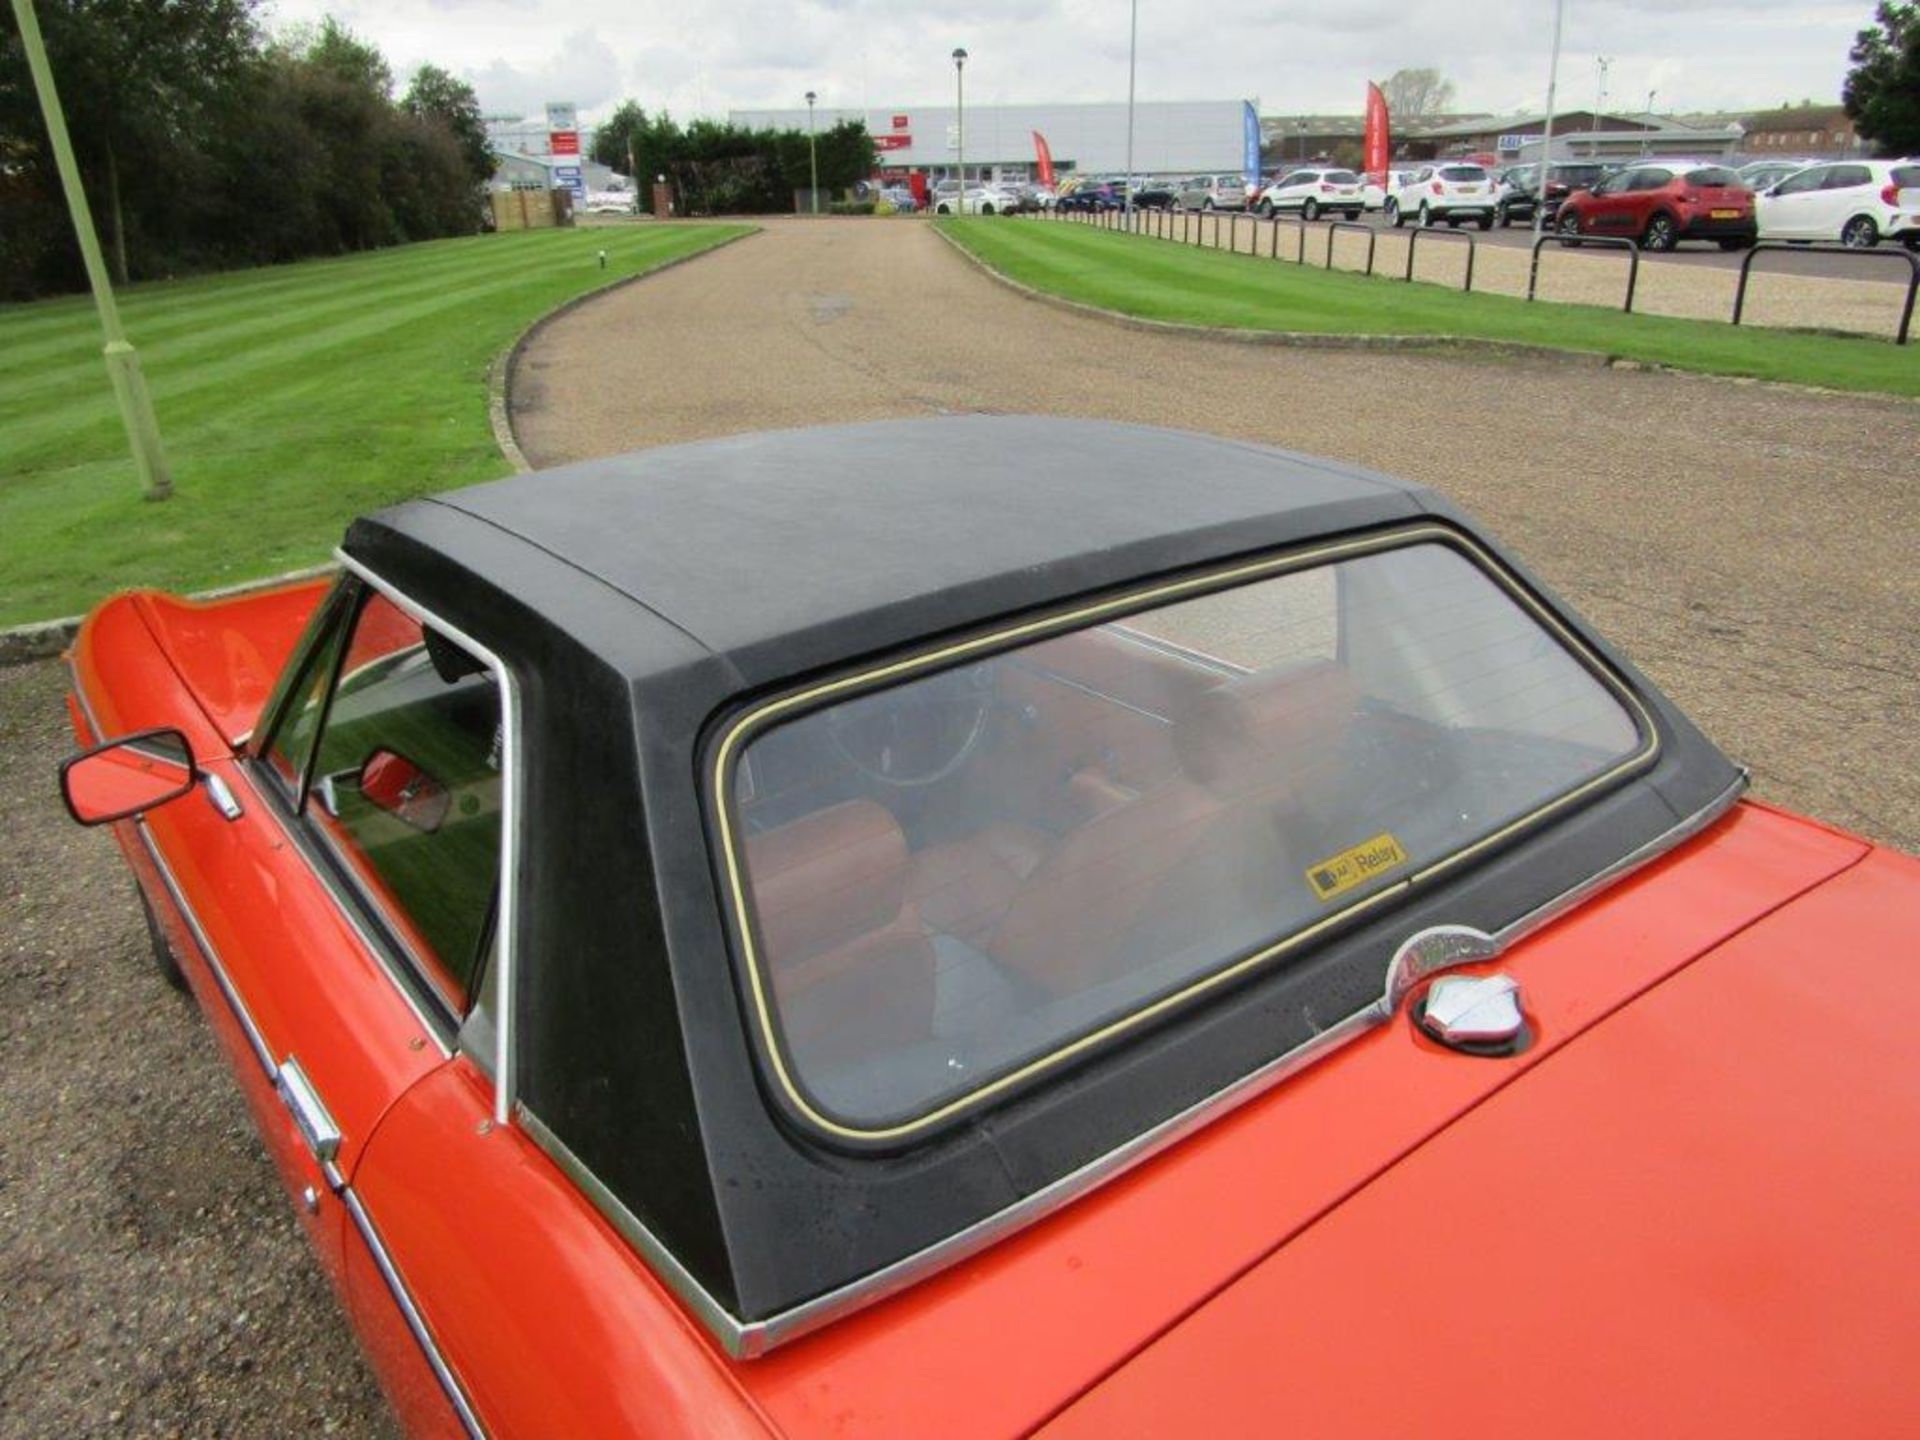 1974 Jensen Healey MK II 21,800 miles from new - Image 8 of 12